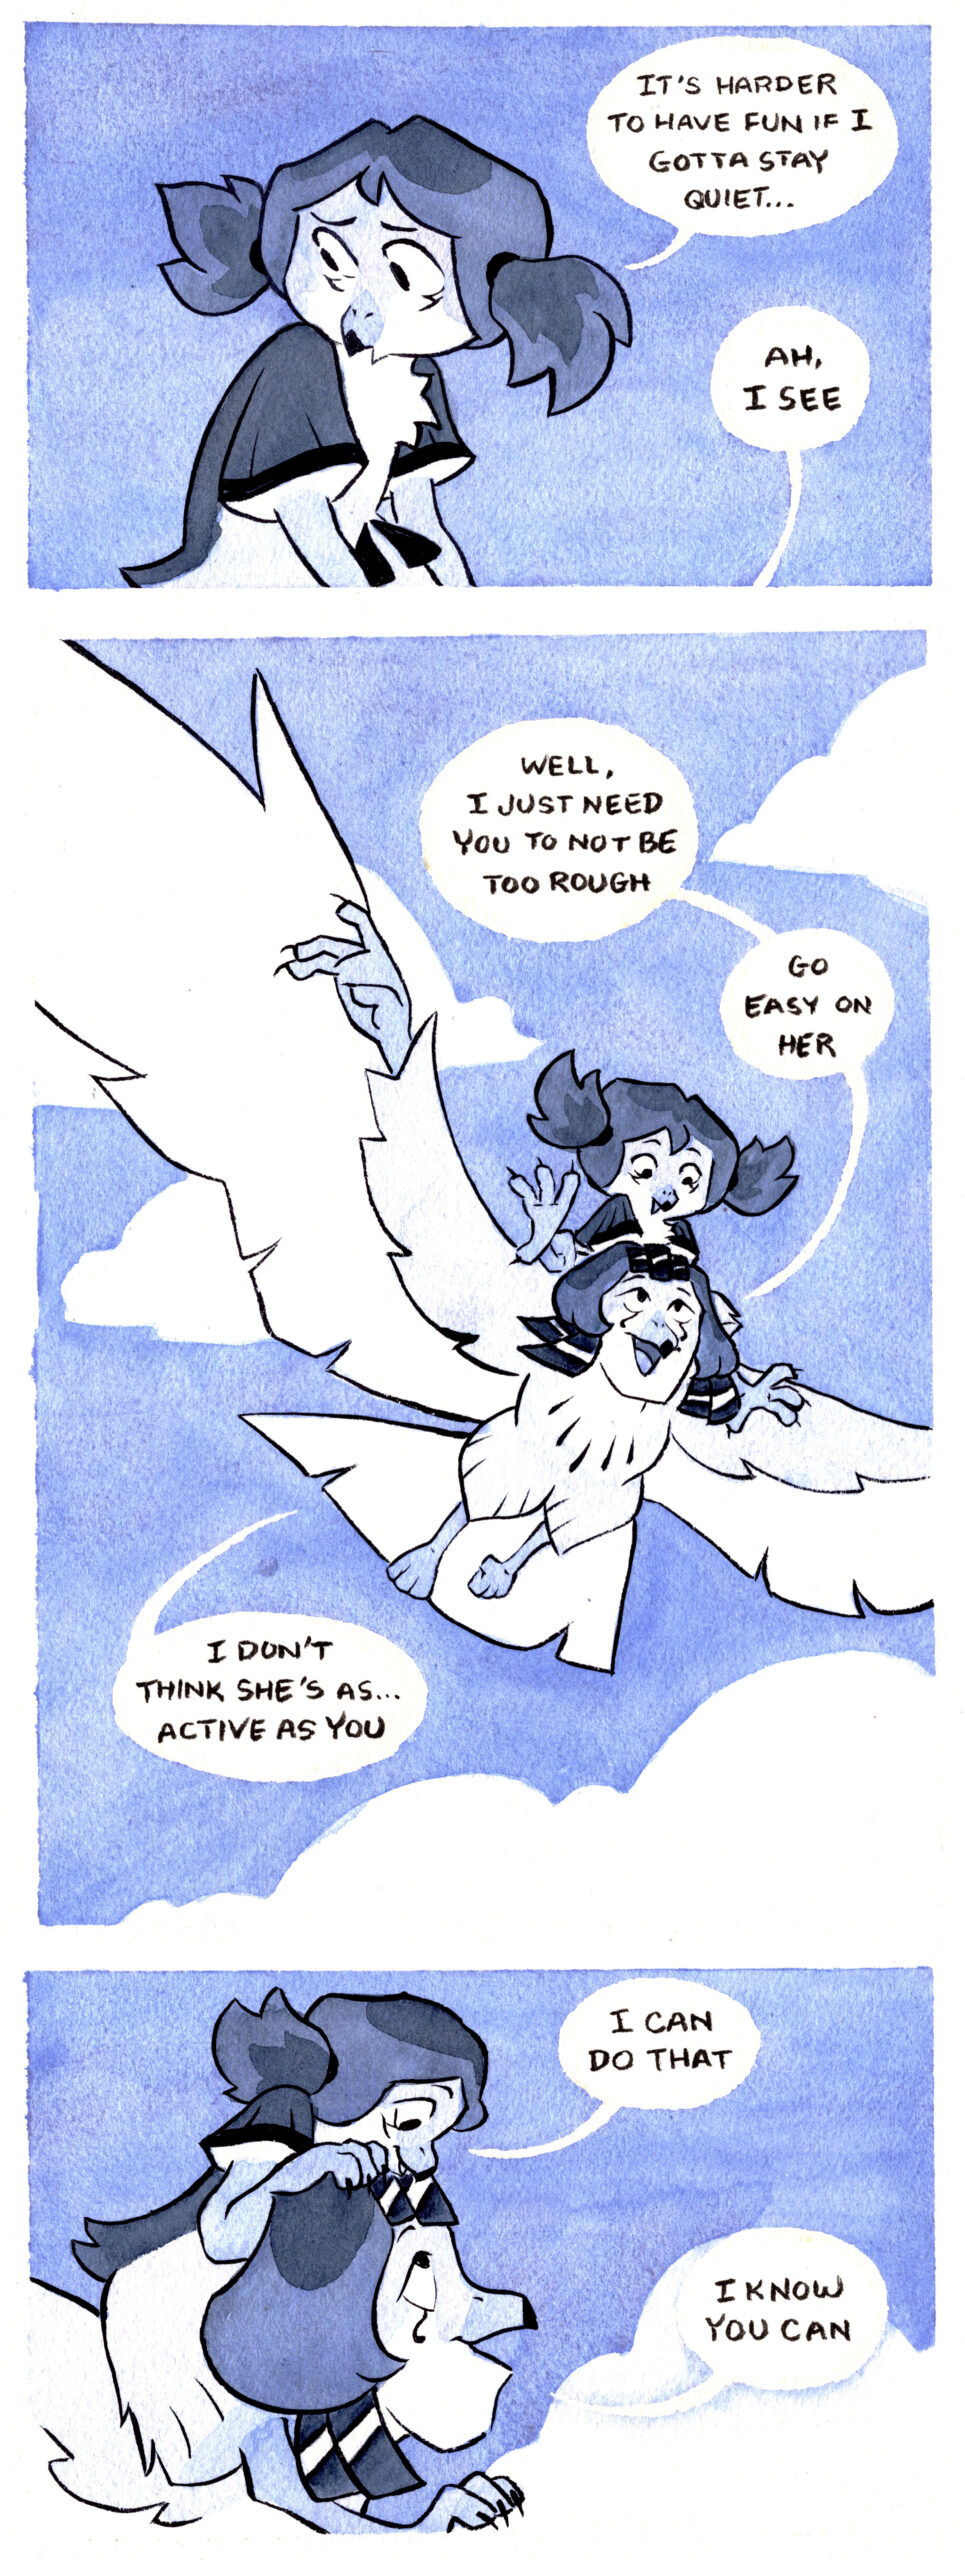 Panel 1: Kia looks off to the side looking doubtful saying "It's harder to have fun if I gotta stay quiet..." Offscreen, her mother Aria says "Ah, I see" Panel 2: Longer panel than usual showing a fullbody image of Aria soaring through the sky on her wings, looking up at Kia riding on her shoulders while giving encouraging advice, "Well, I just need you to no be too rough. Go easy on her. I don't think she's as...active as you." Panel 3: Closer on Kia on Aria's shoulder looking down at her, they're in profile facing right. Kia: "I can do that" Aria: "I know you can"